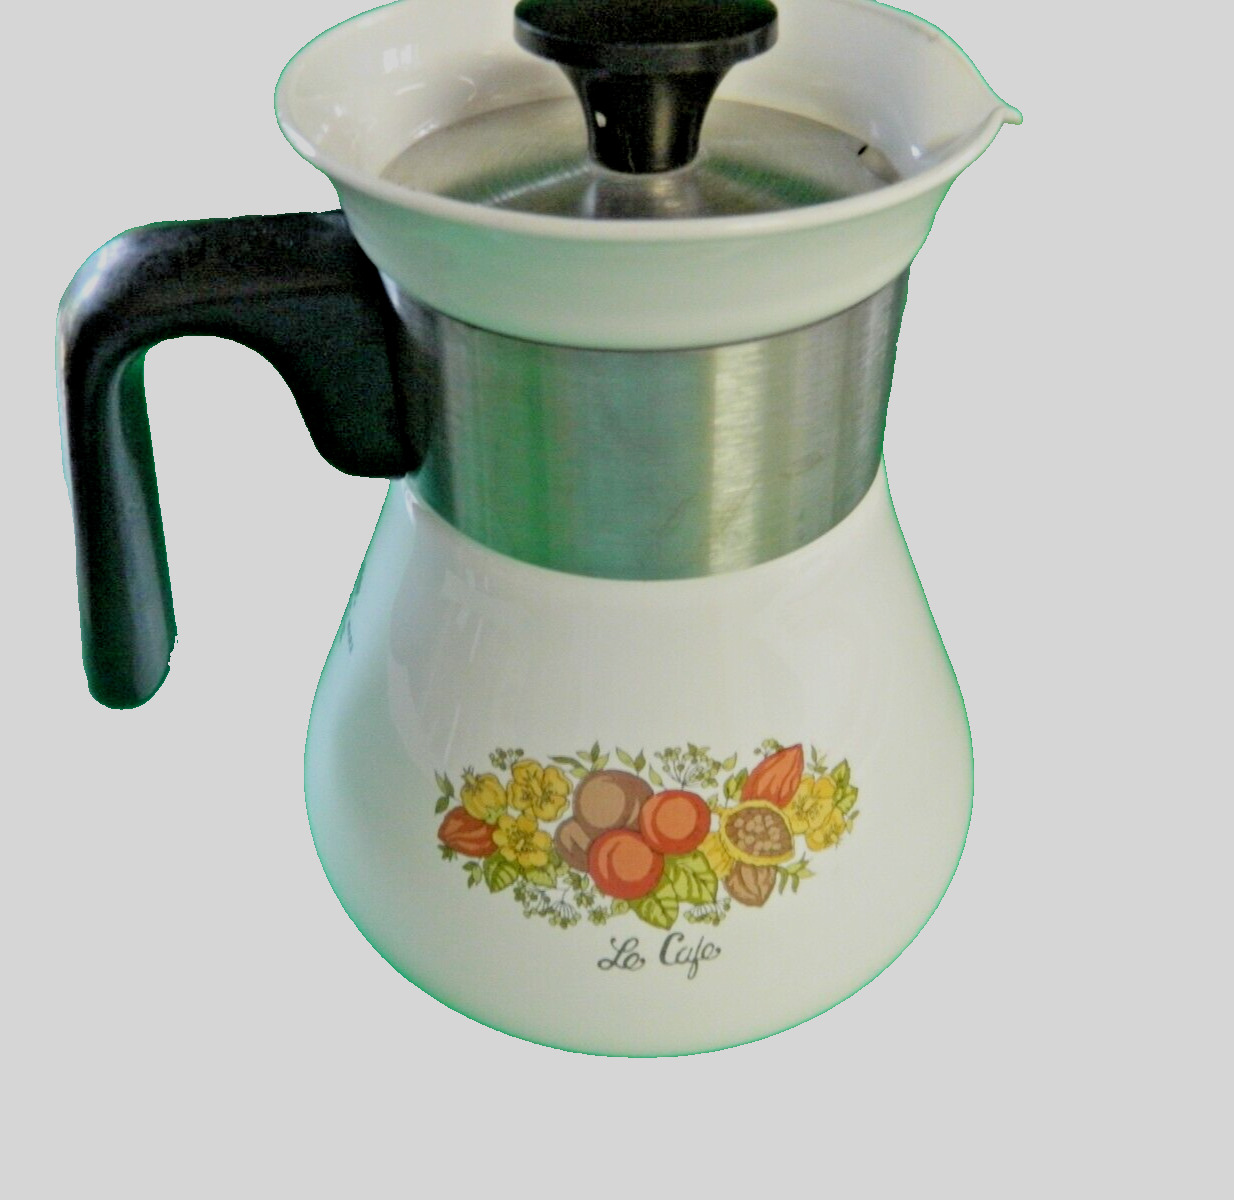 CORNING 6-CUP, LE CAFE SPICE OF LIFE, P-106 LONG NECK COFFEE / TEAPOT WITH LID.